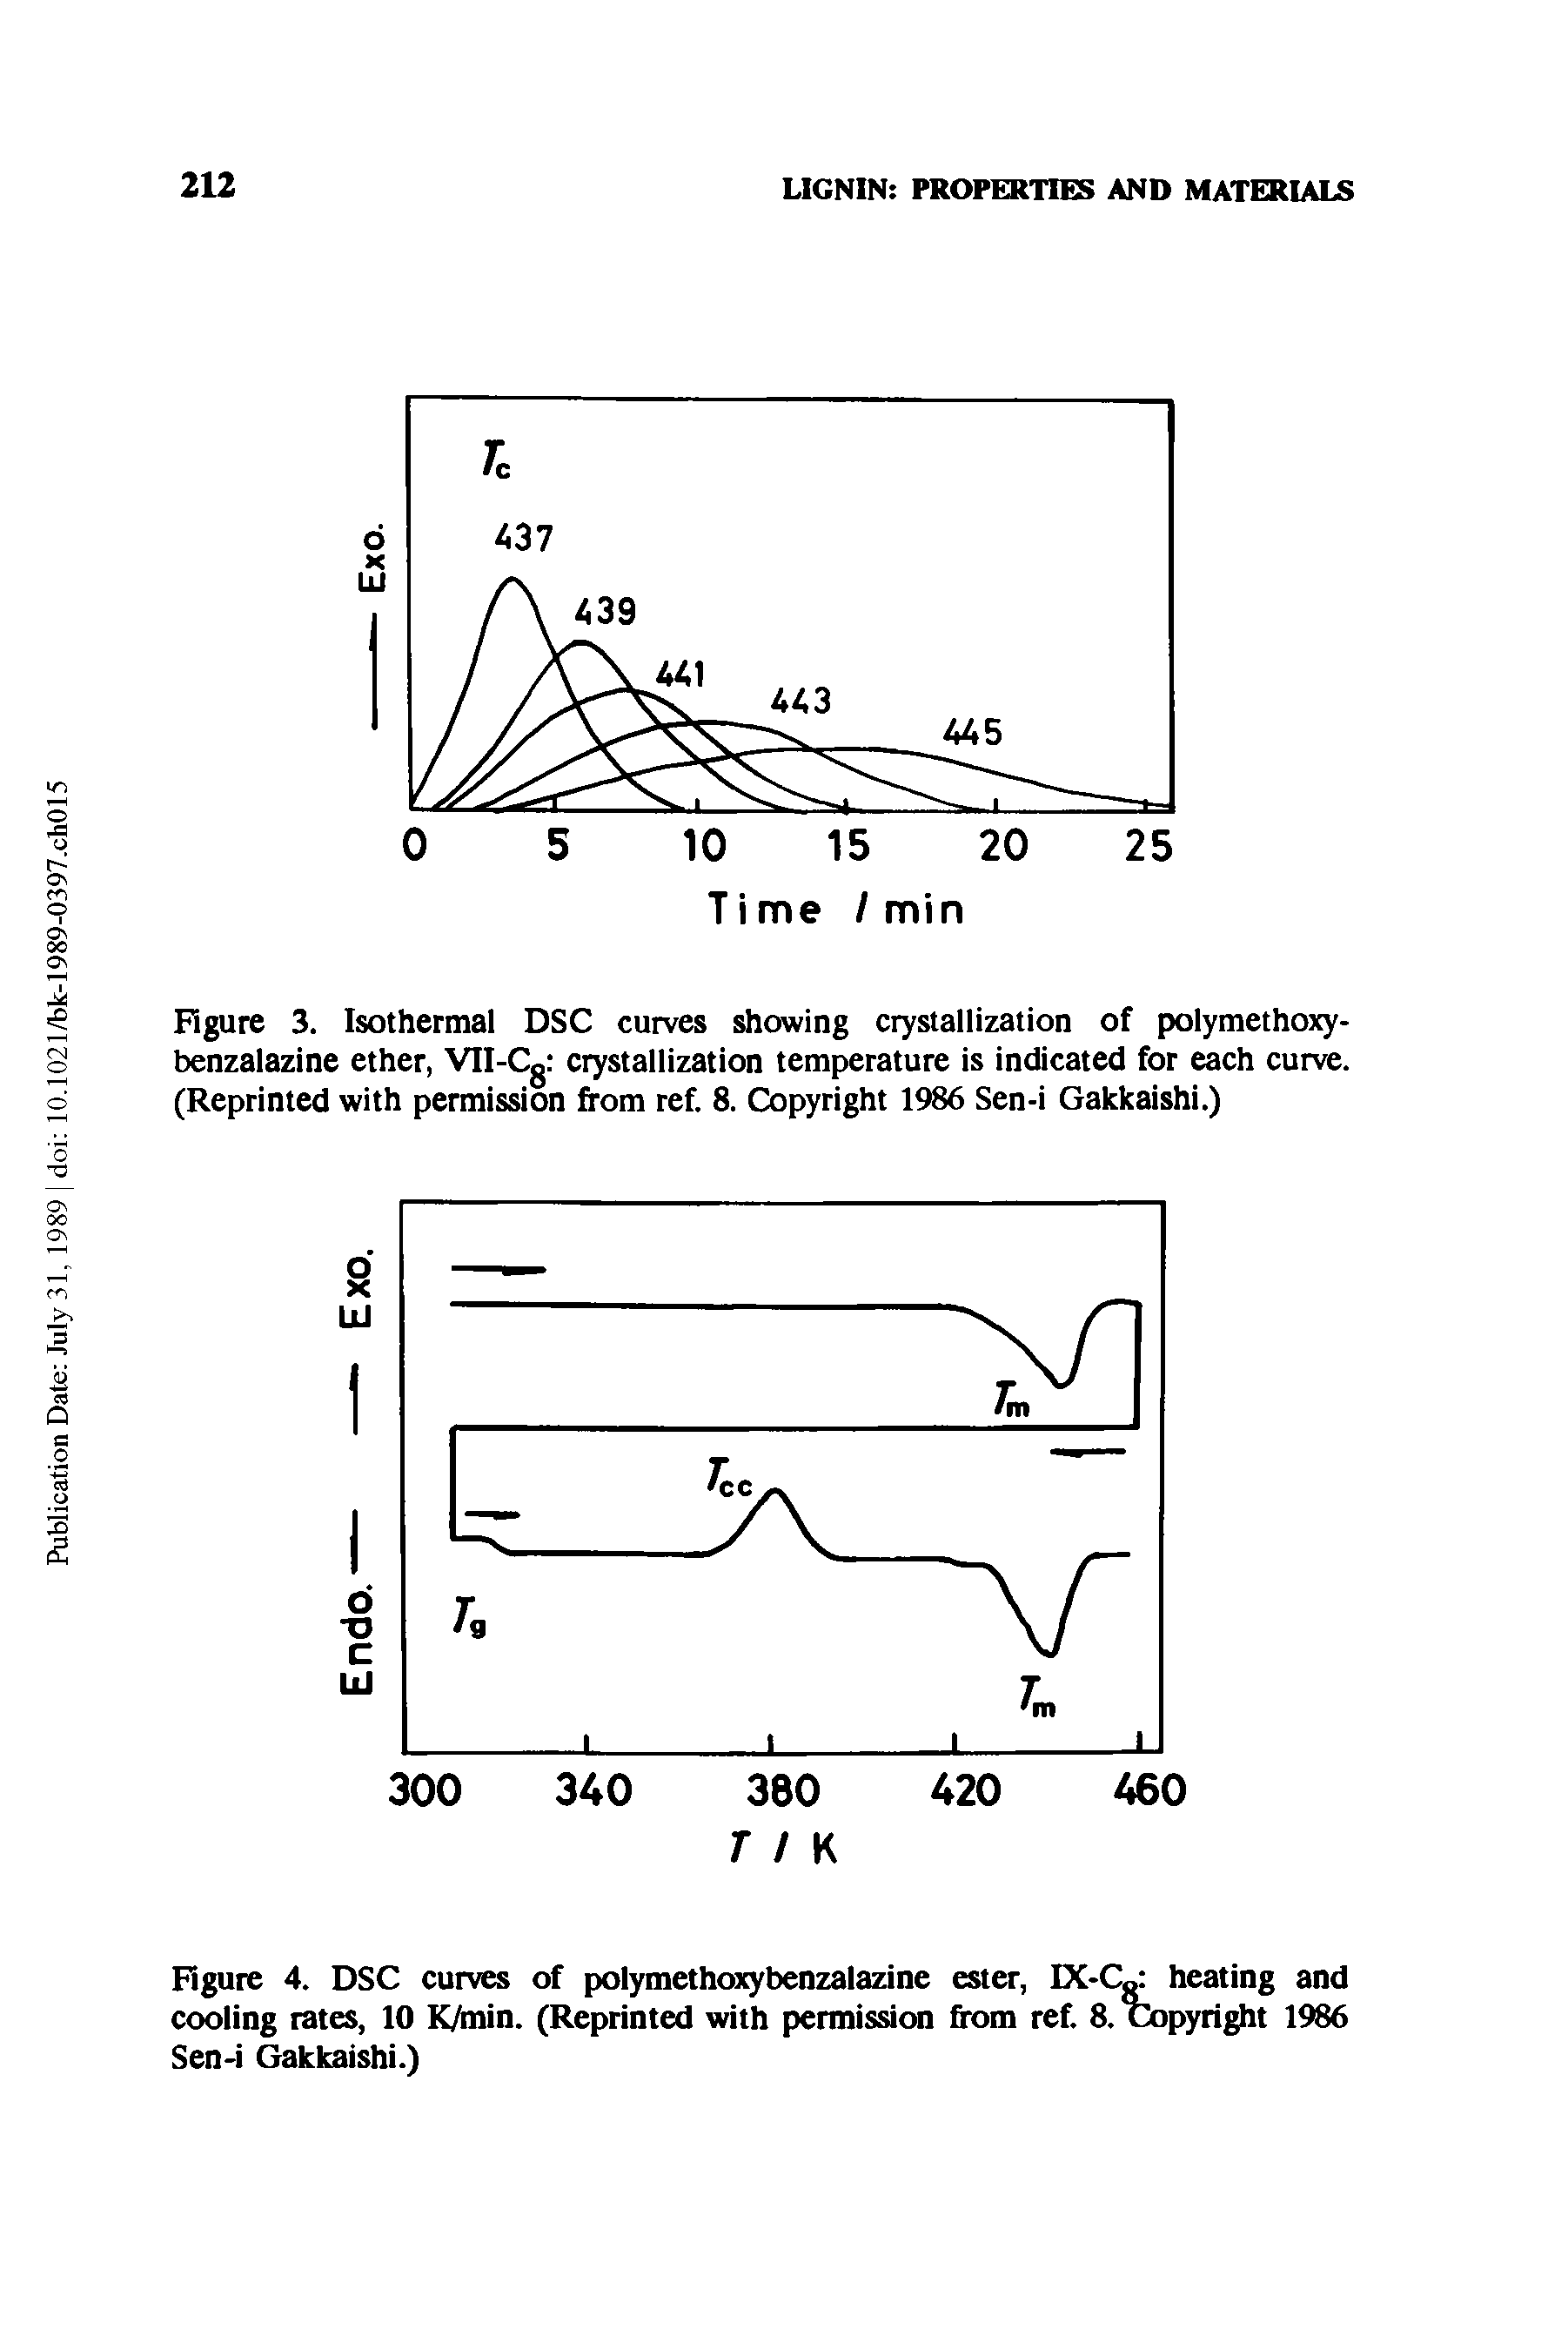 Figure 3. Isothermal DSC curves showing crystallization of polymethoxy-benzalazine ether, VII-Cg crystallization temperature is indicated for each curve. (Reprinted with permission from ref. 8. Copyright 1986 Sen-i Gakkaishi.)...